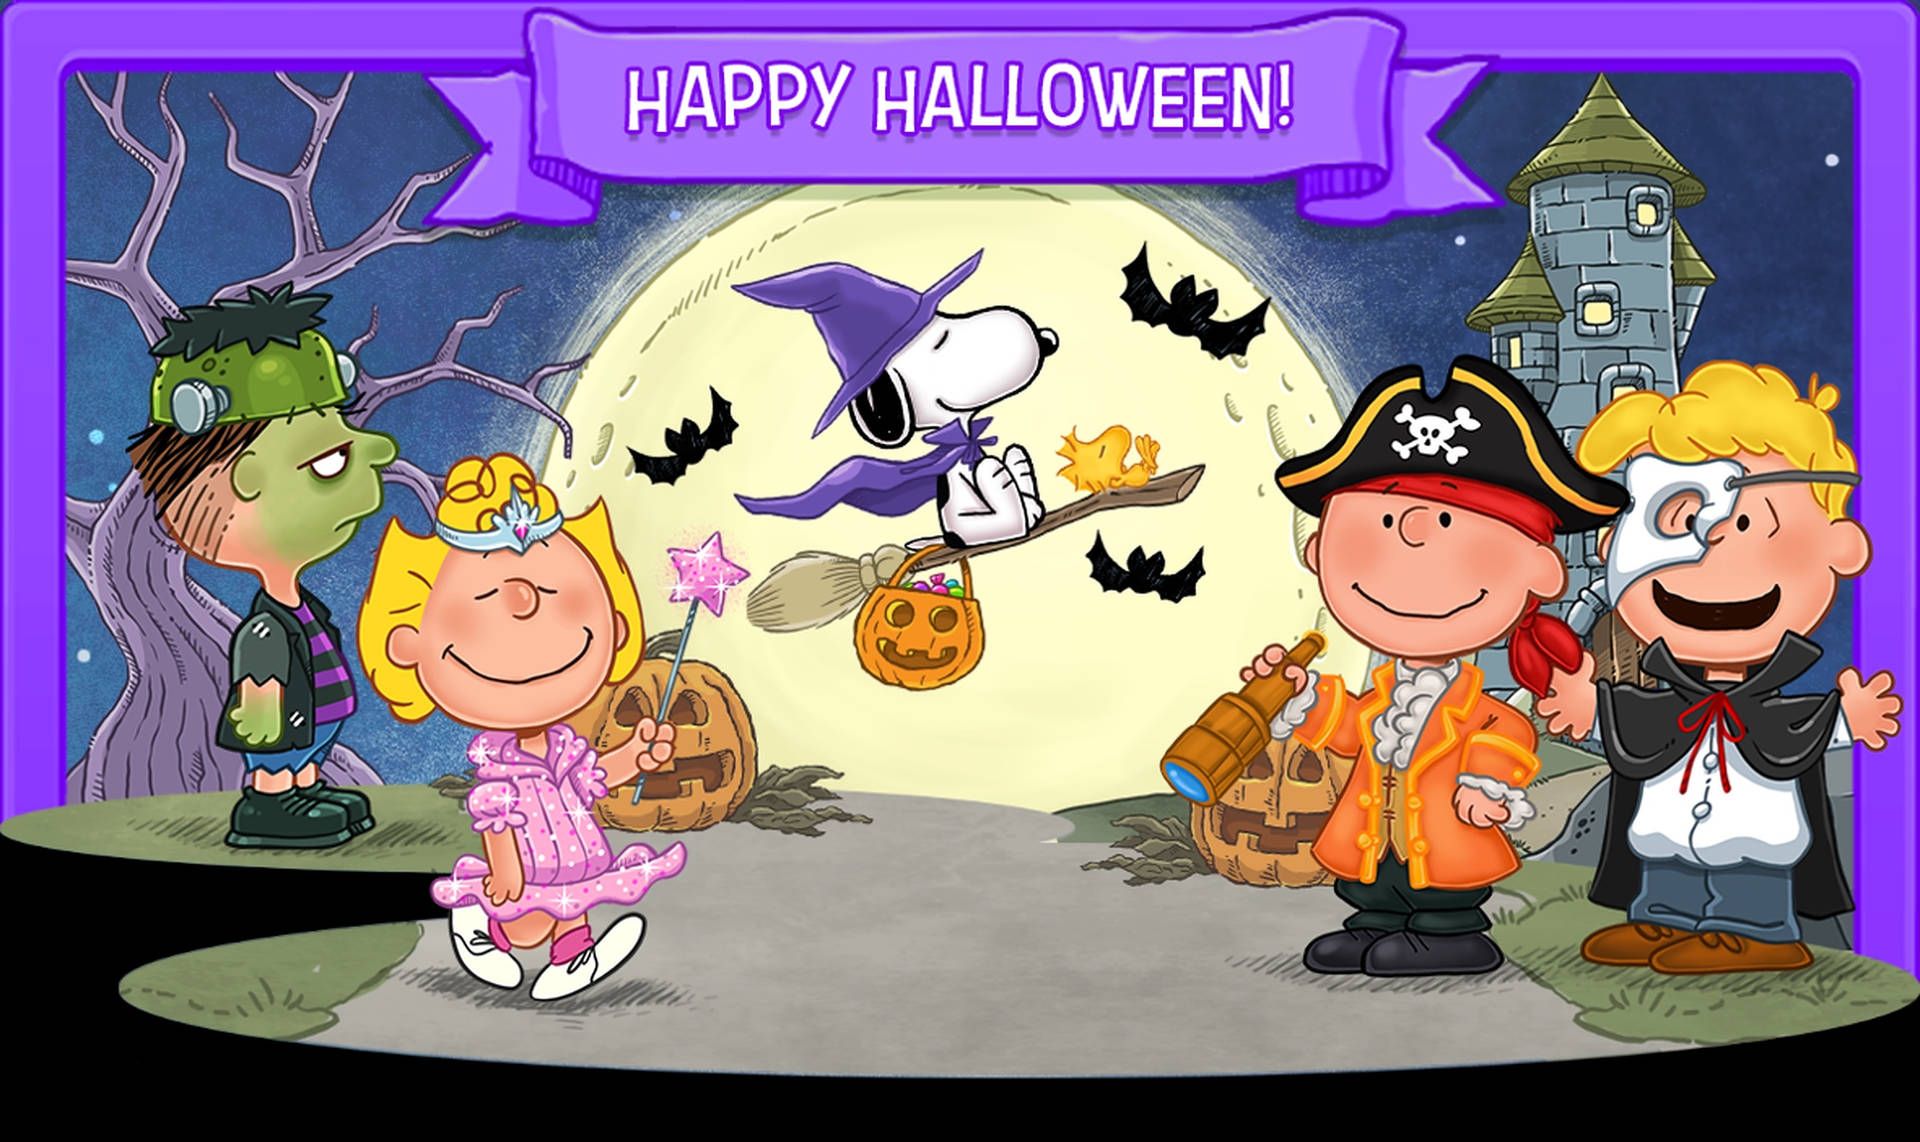 A Halloween scene with Charlie Brown, Snoopy, and friends. - Charlie Brown